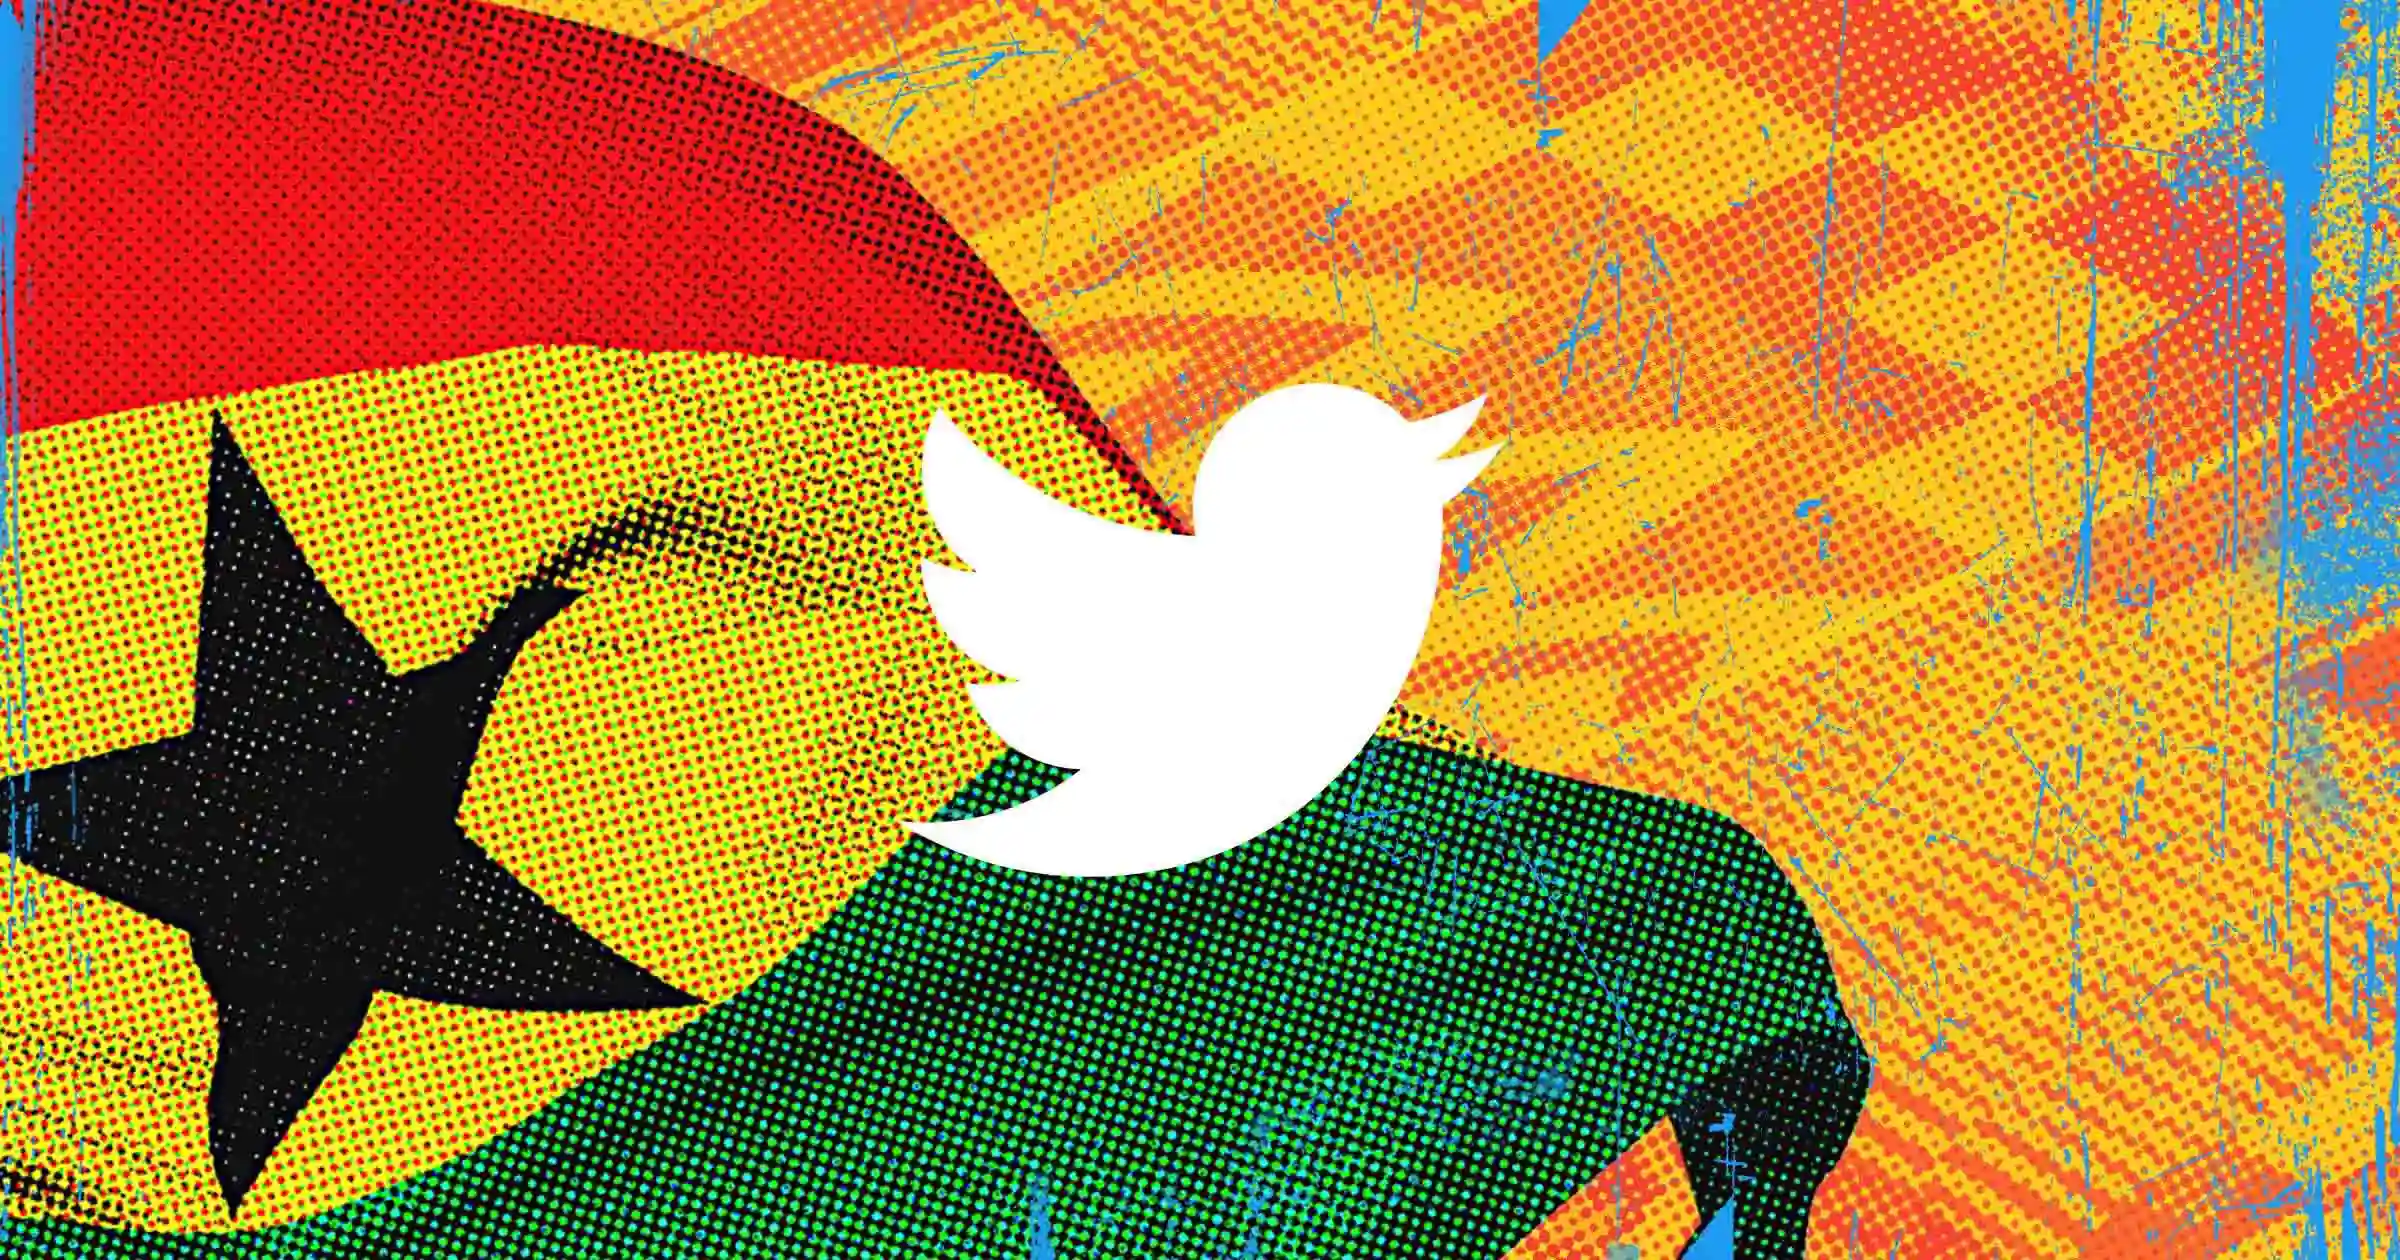 Twitter Chooses Ghana For Its First African Office